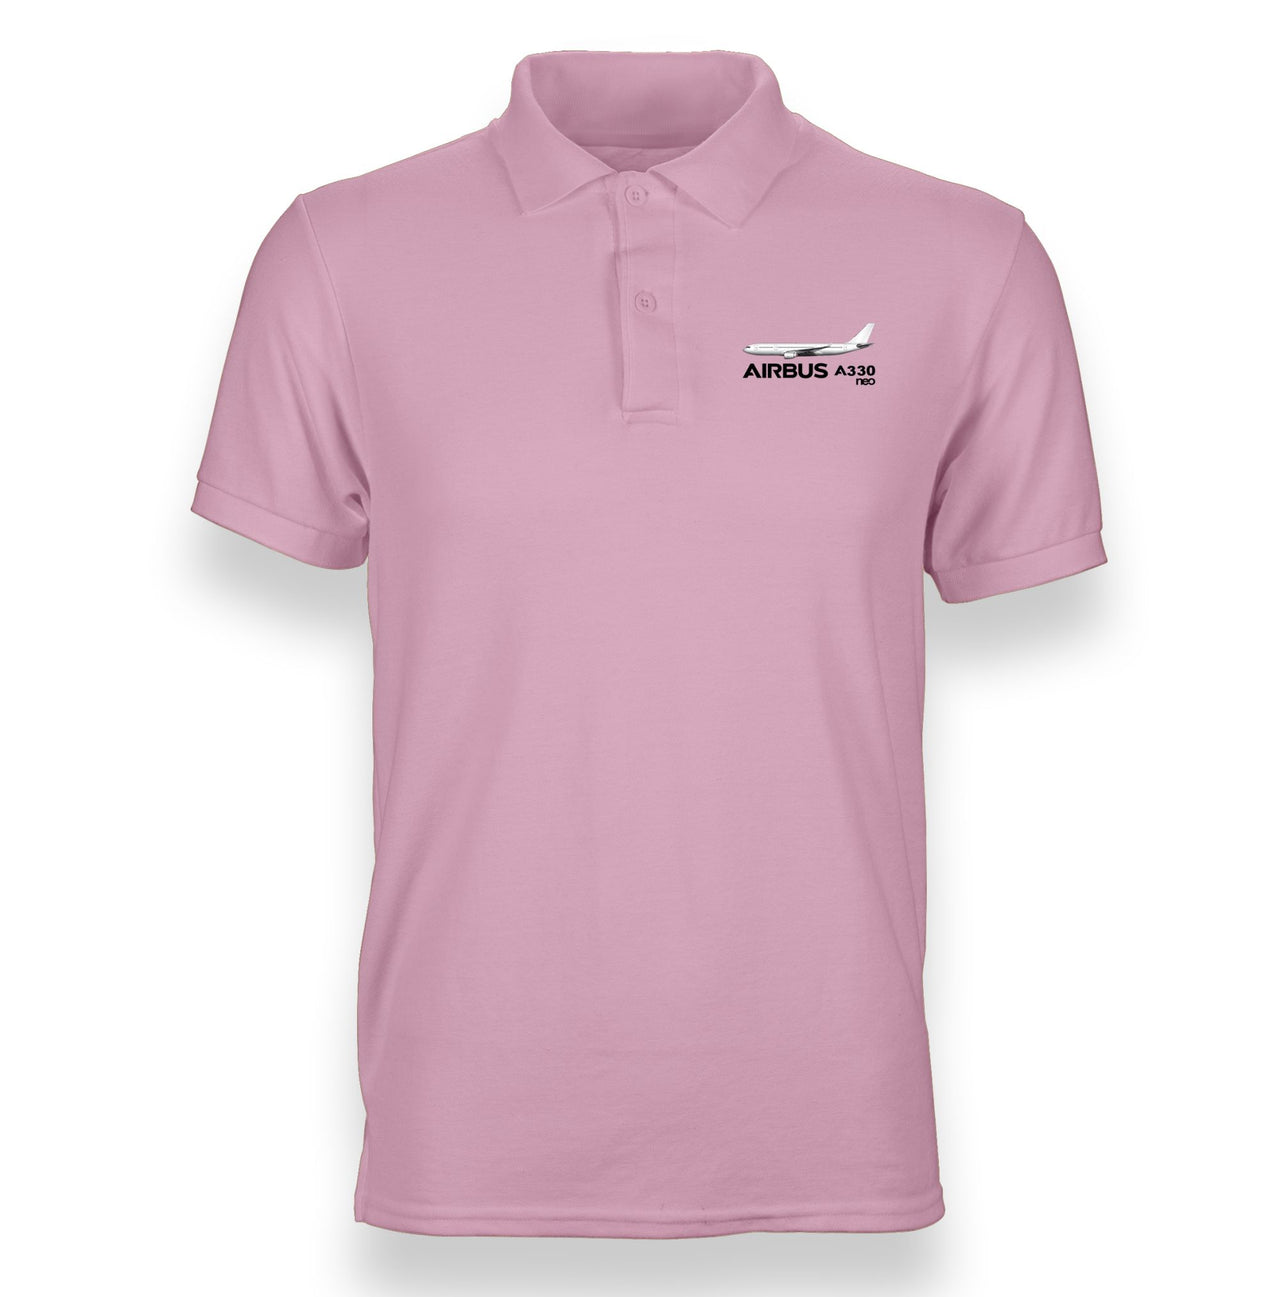 The Airbus A330neo Designed "WOMEN" Polo T-Shirts